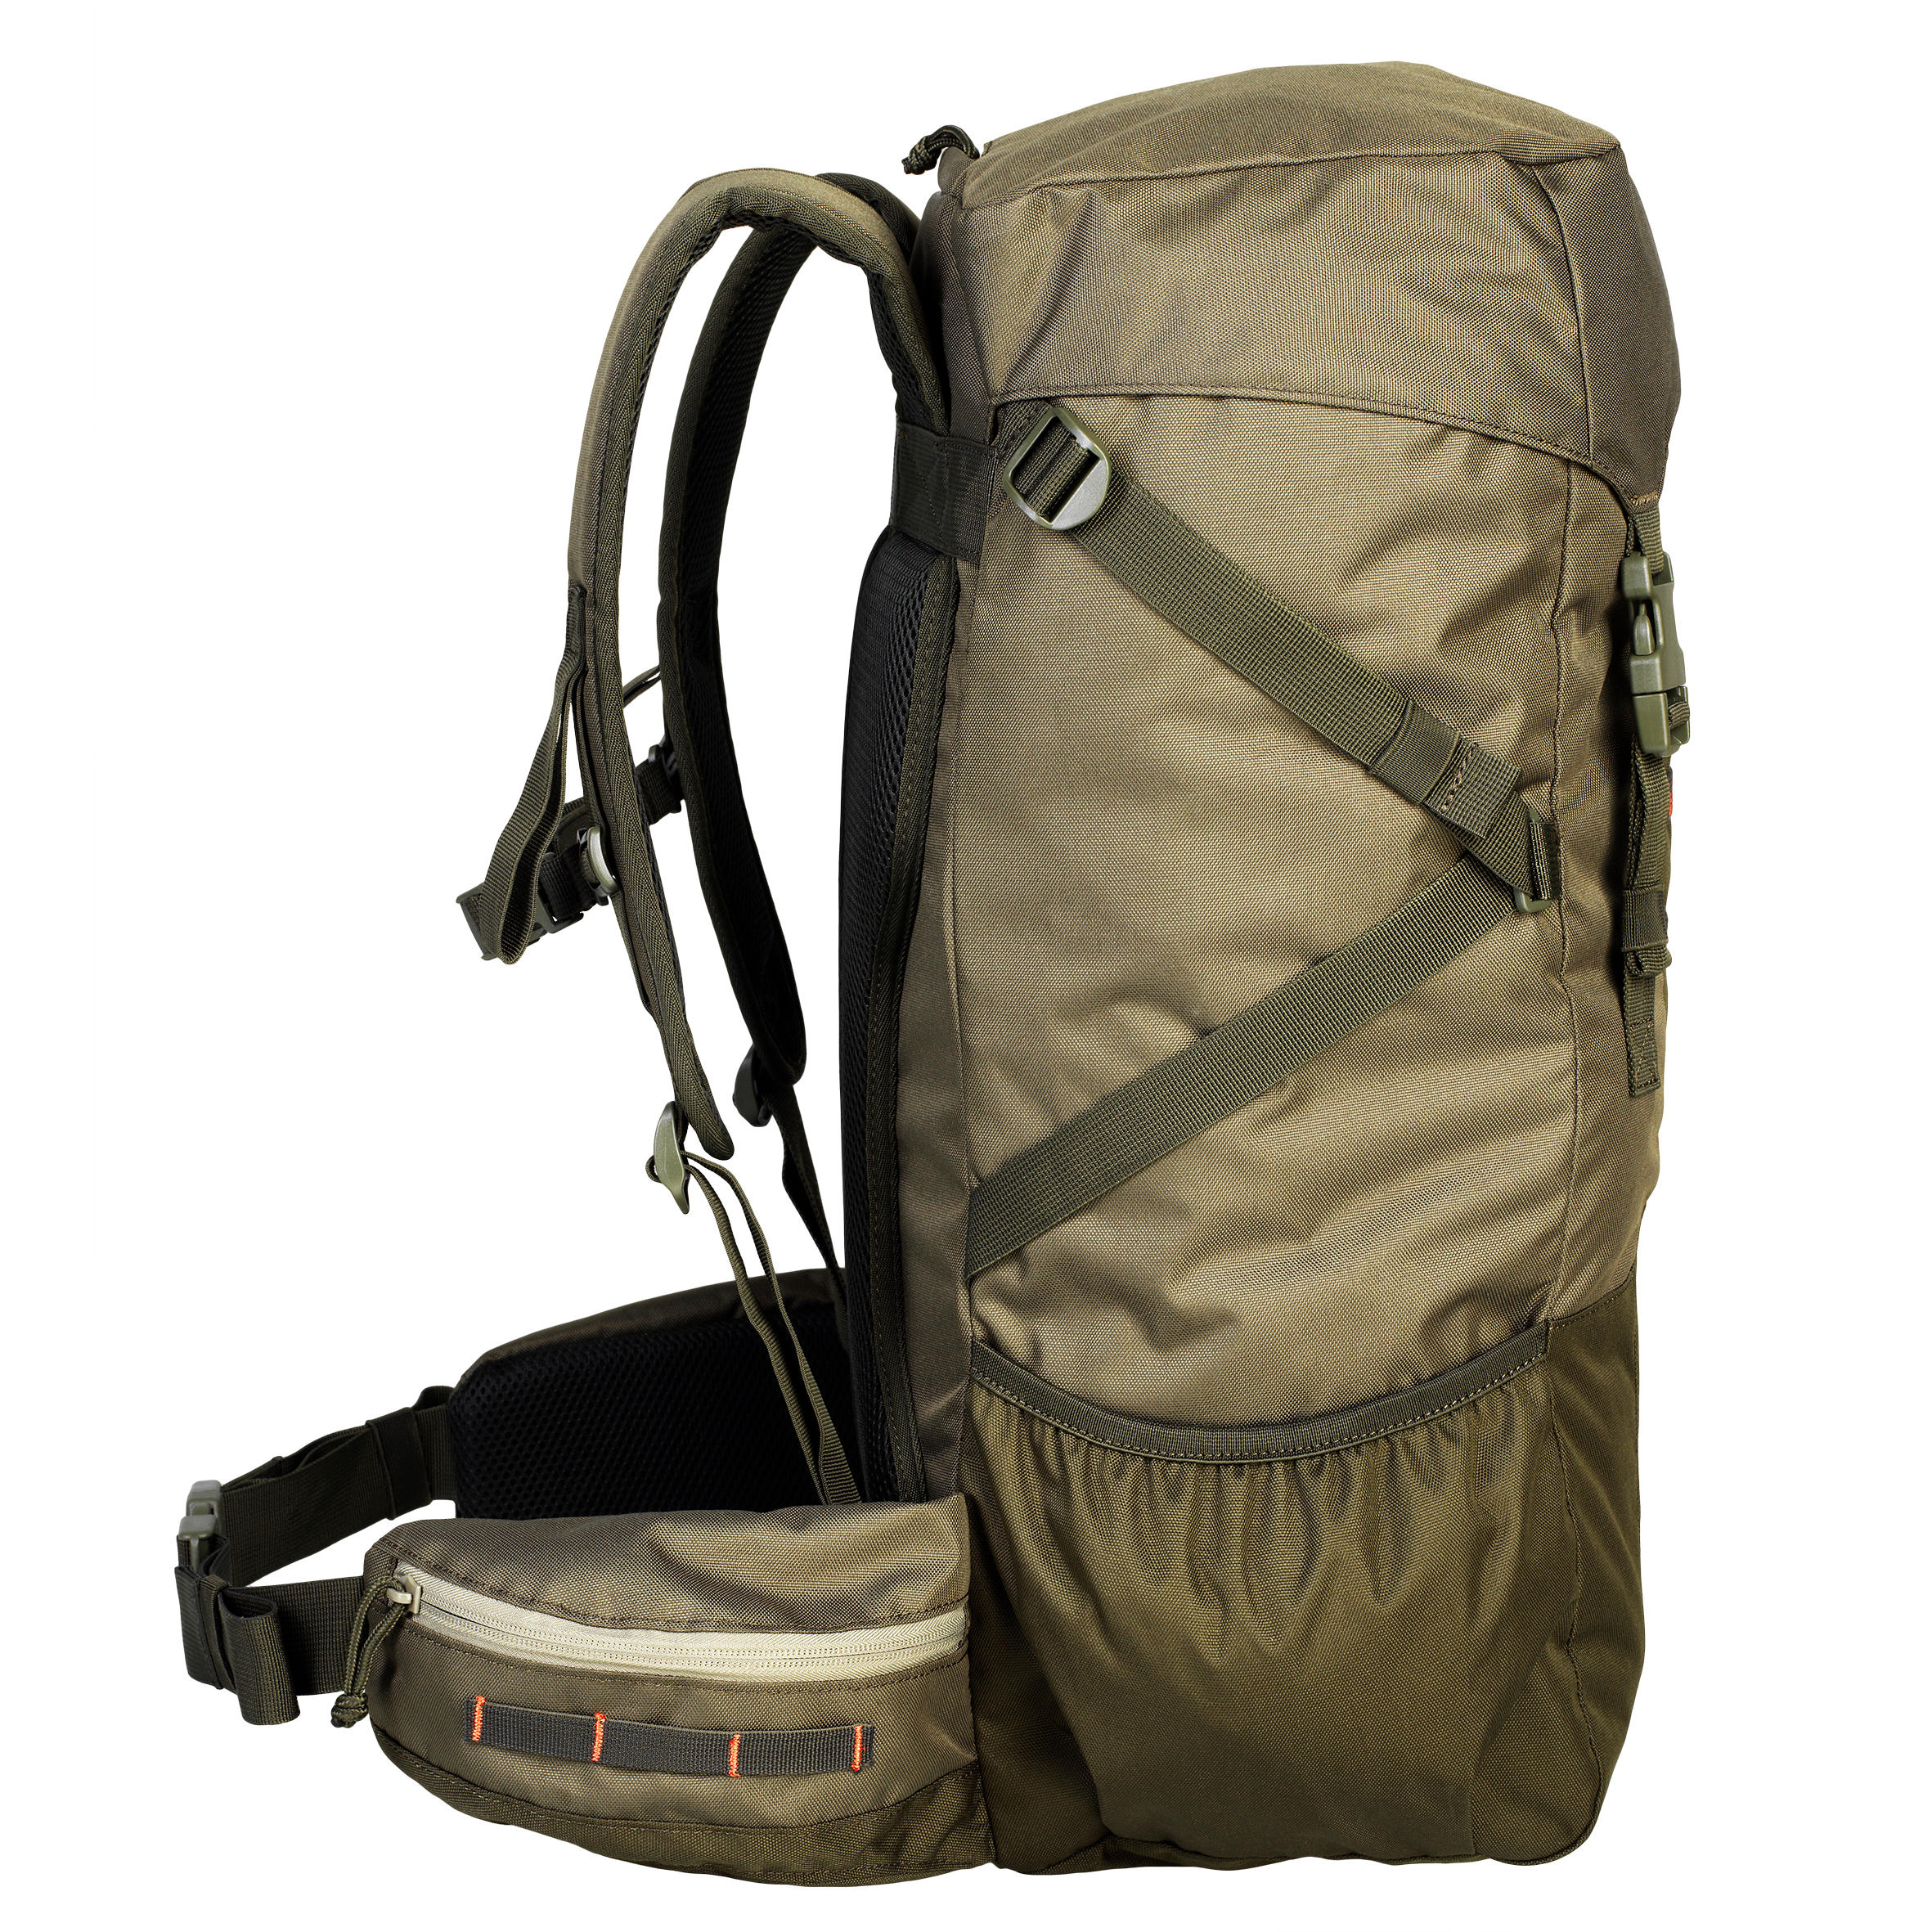 *BEST PRICE*  X-ACCESS BACKPACK 50 LITRES 2.0 KHAKI 